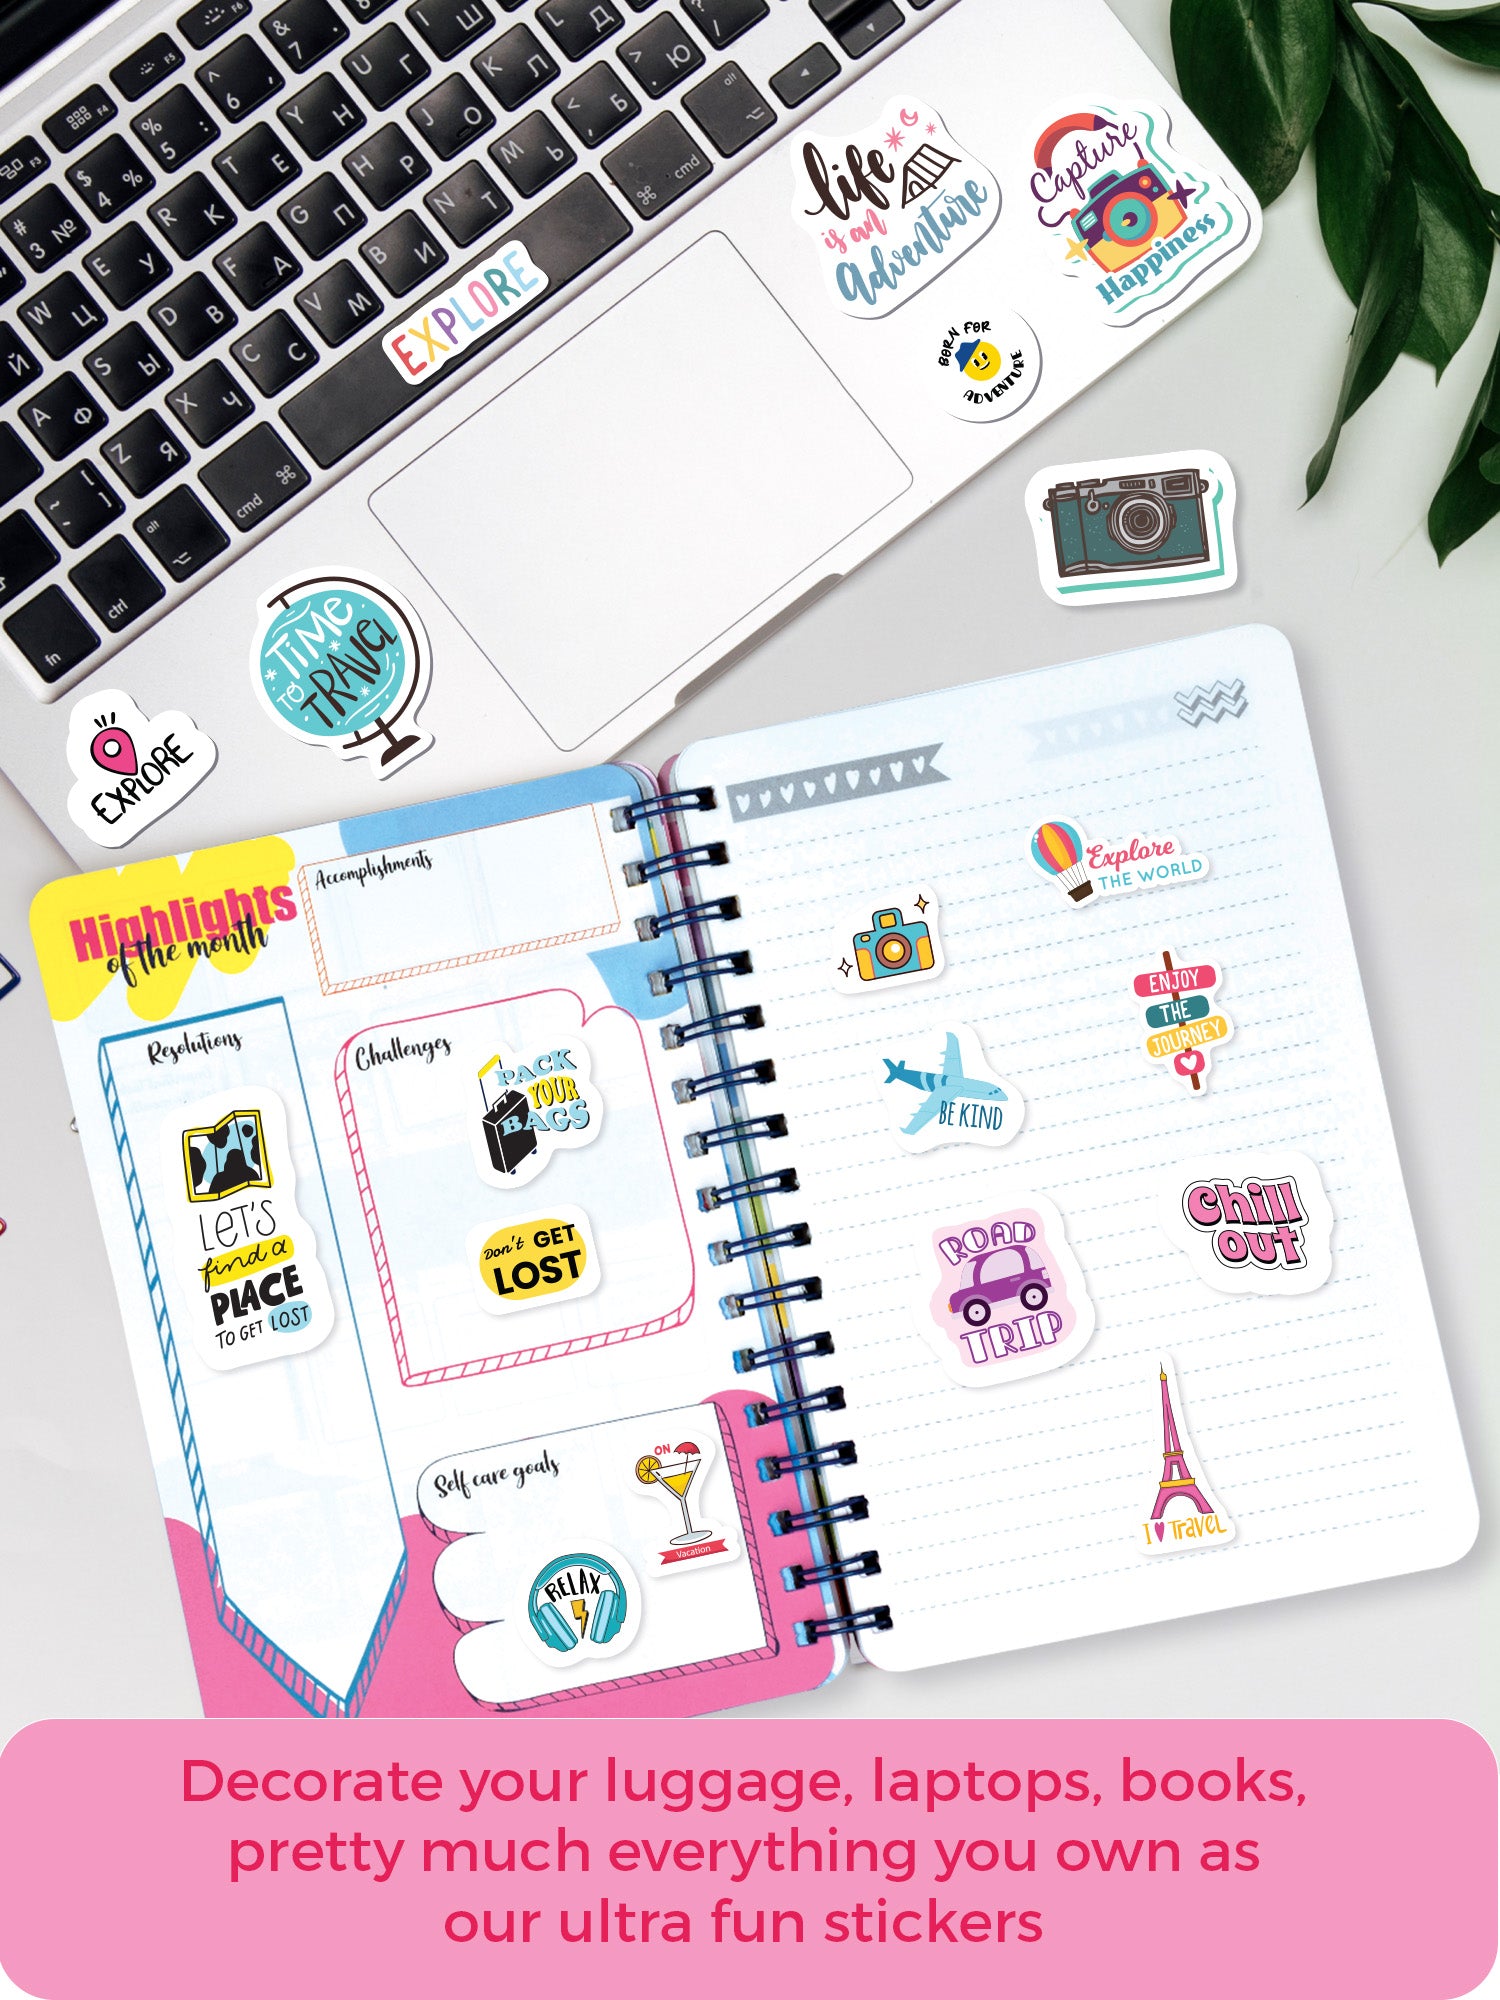 Stick On the Fun: 350+ Quirky Travel Theme Stickers in 10 Pages (Travelogue Stickers)